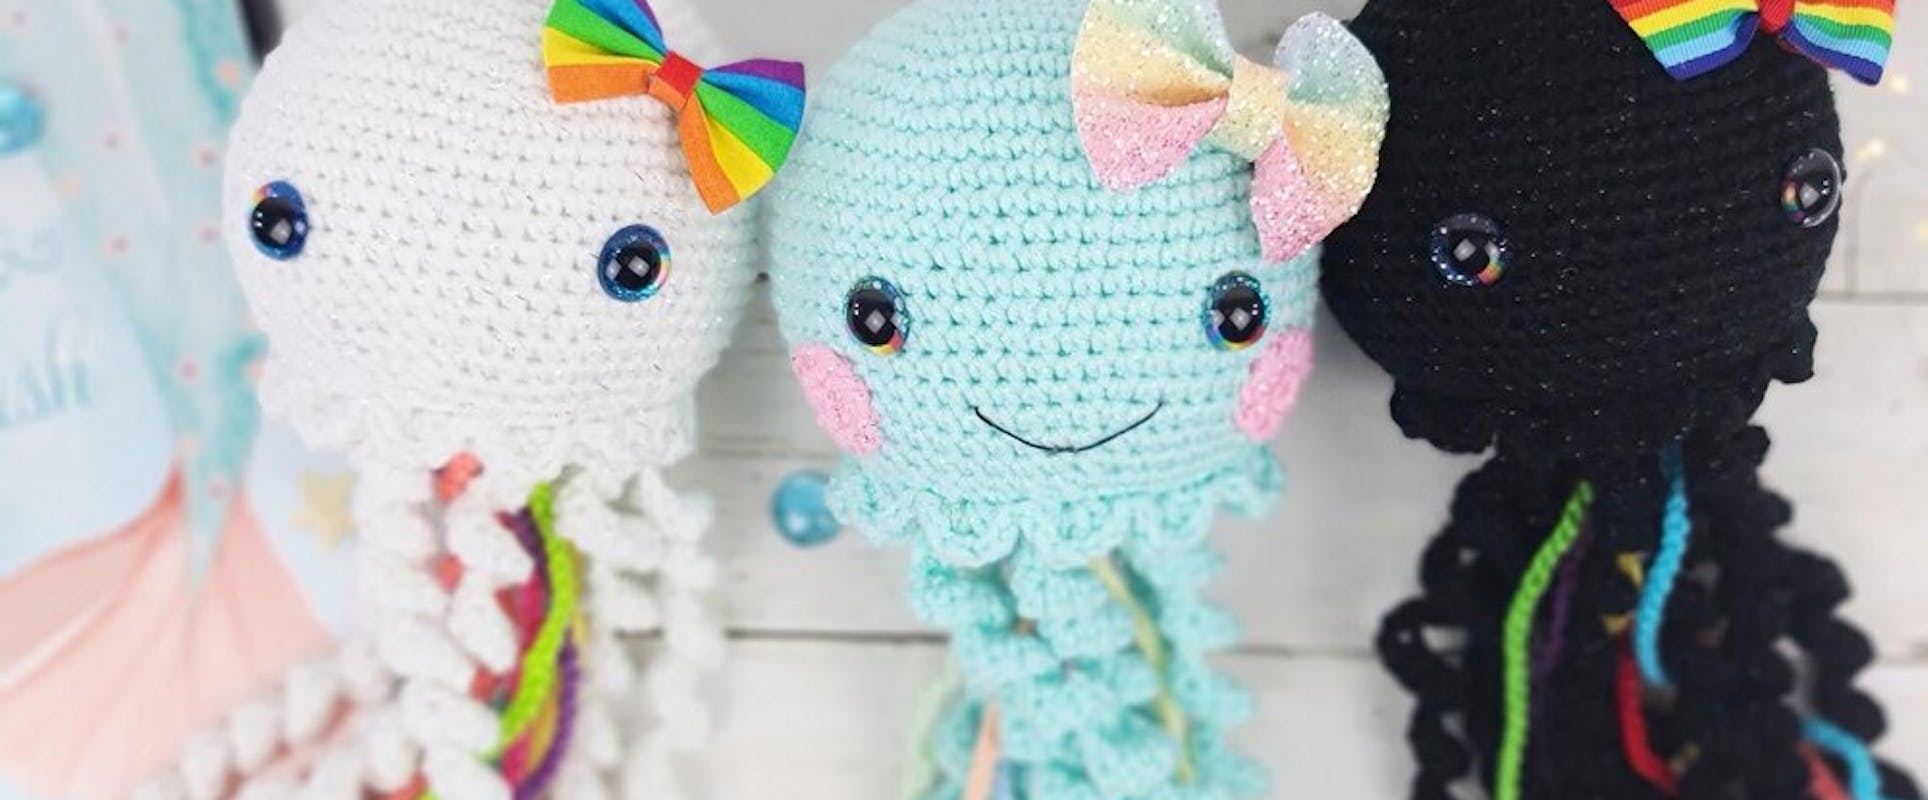 Top 30 Exclusive Free Crochet Patterns to Print